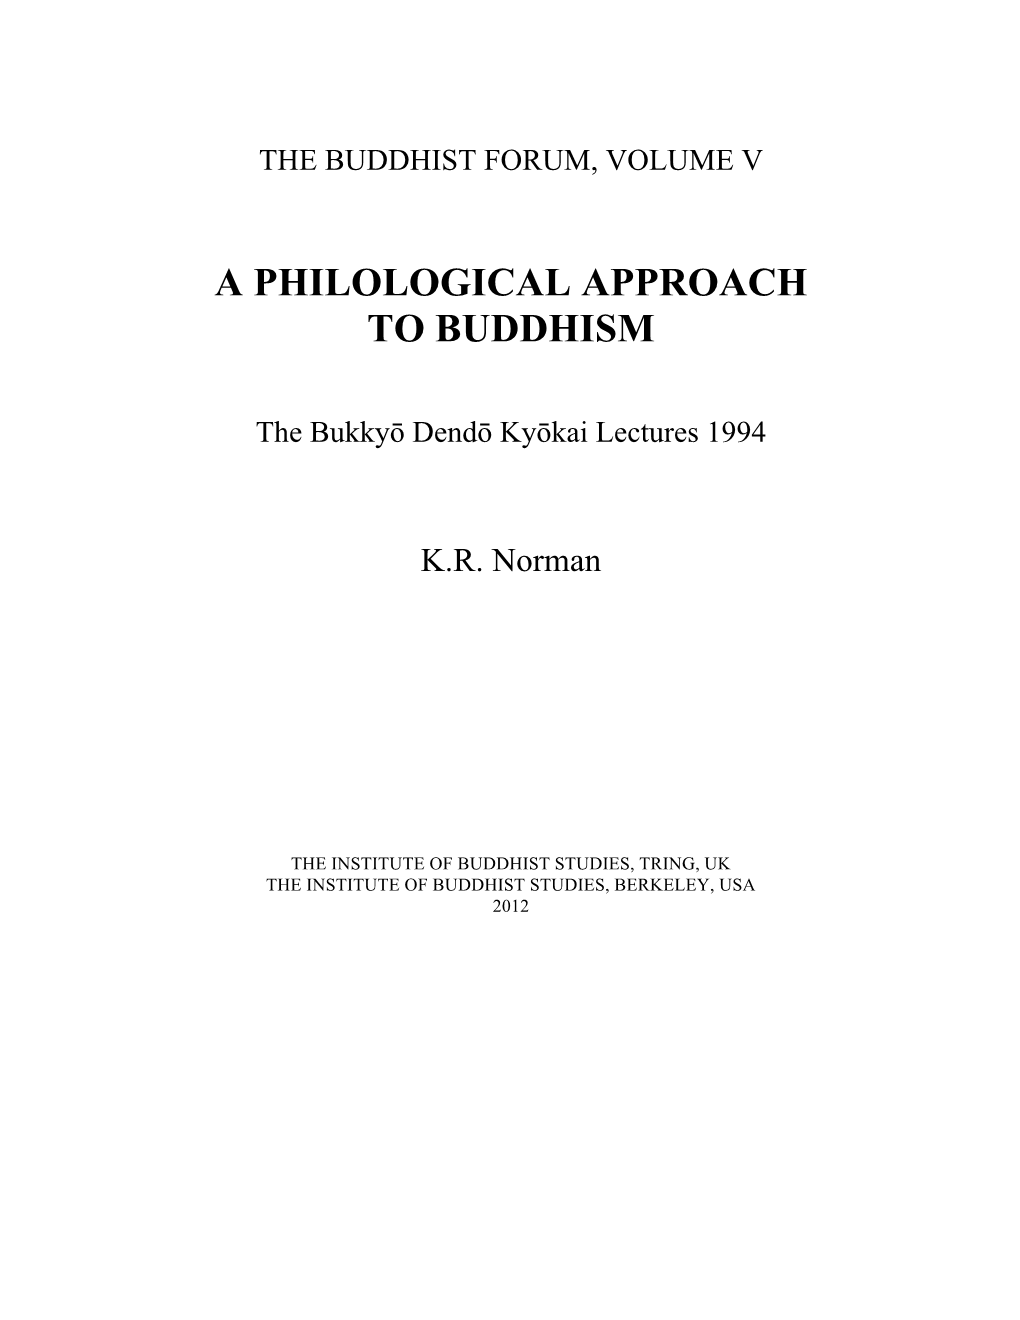 A Philological Approach to Buddhism